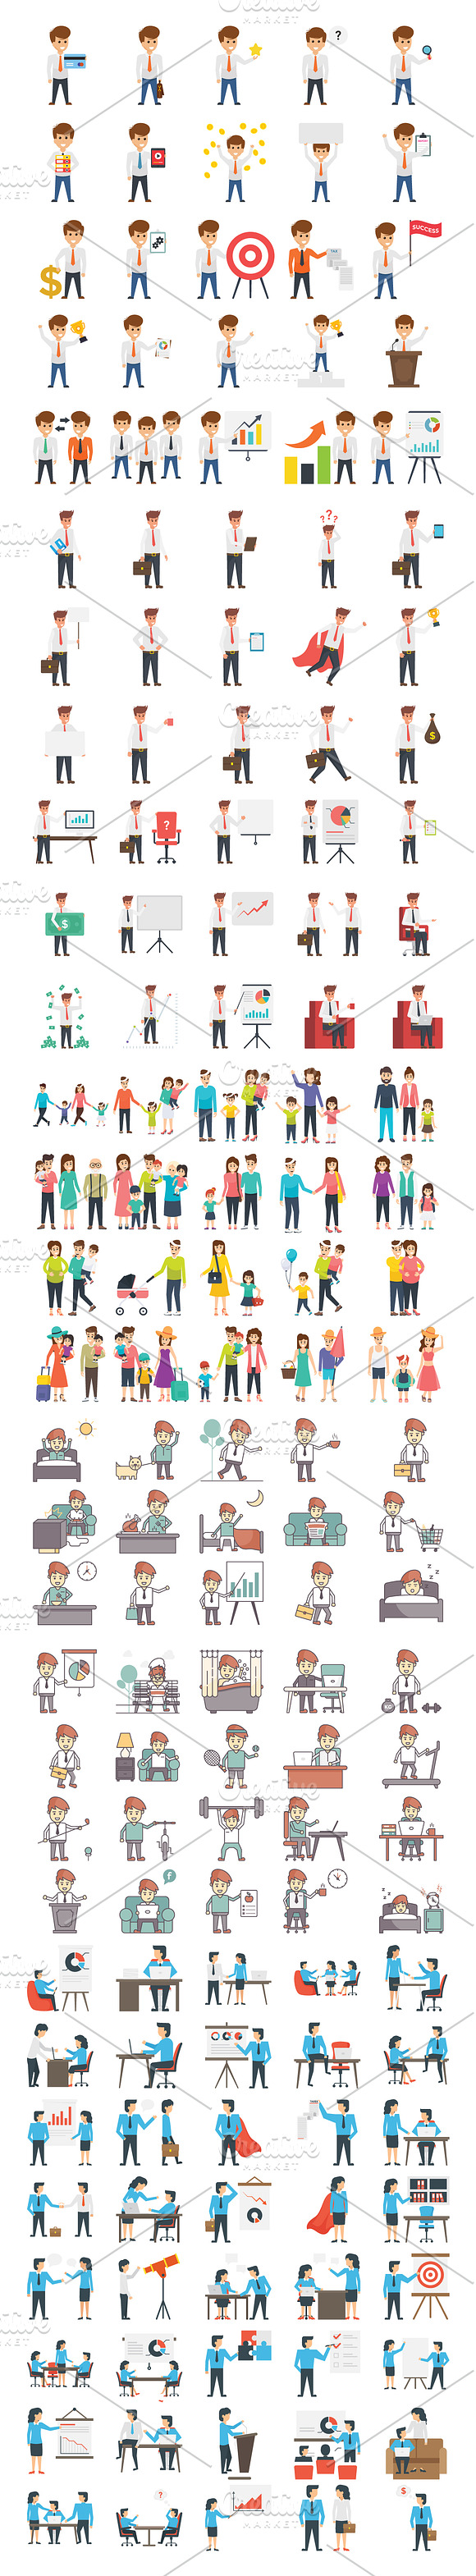 1200+ Vector Cartoon Characters in Illustrations - product preview 1